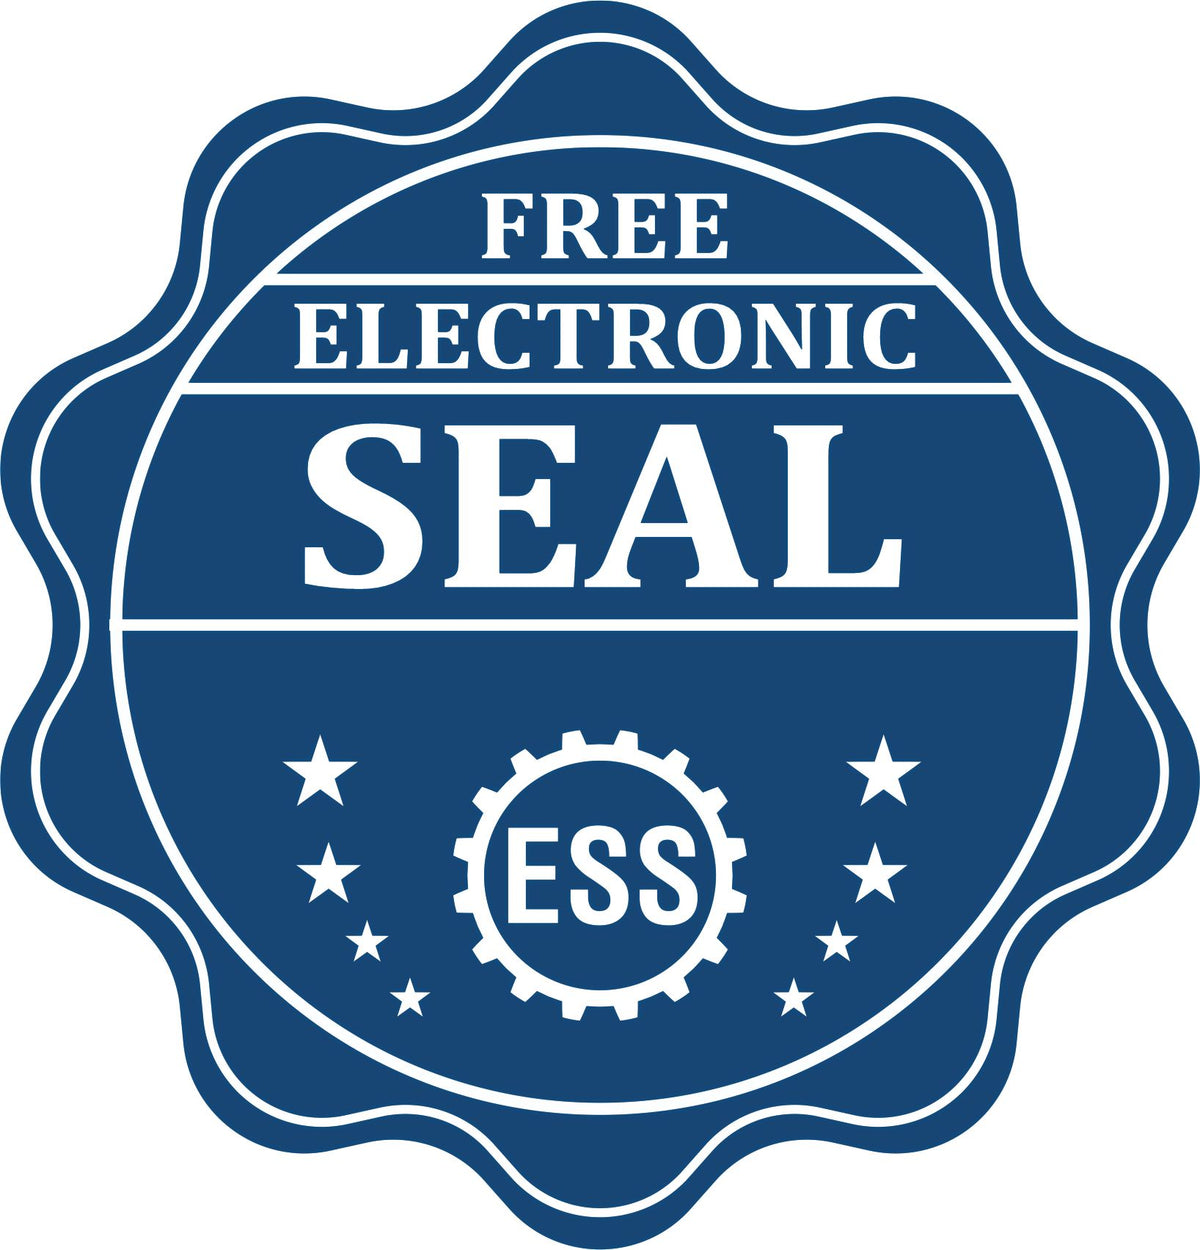 A badge showing a free electronic seal for the Heavy-Duty Utah Rectangular Notary Stamp with stars and the ESS gear on the emblem.